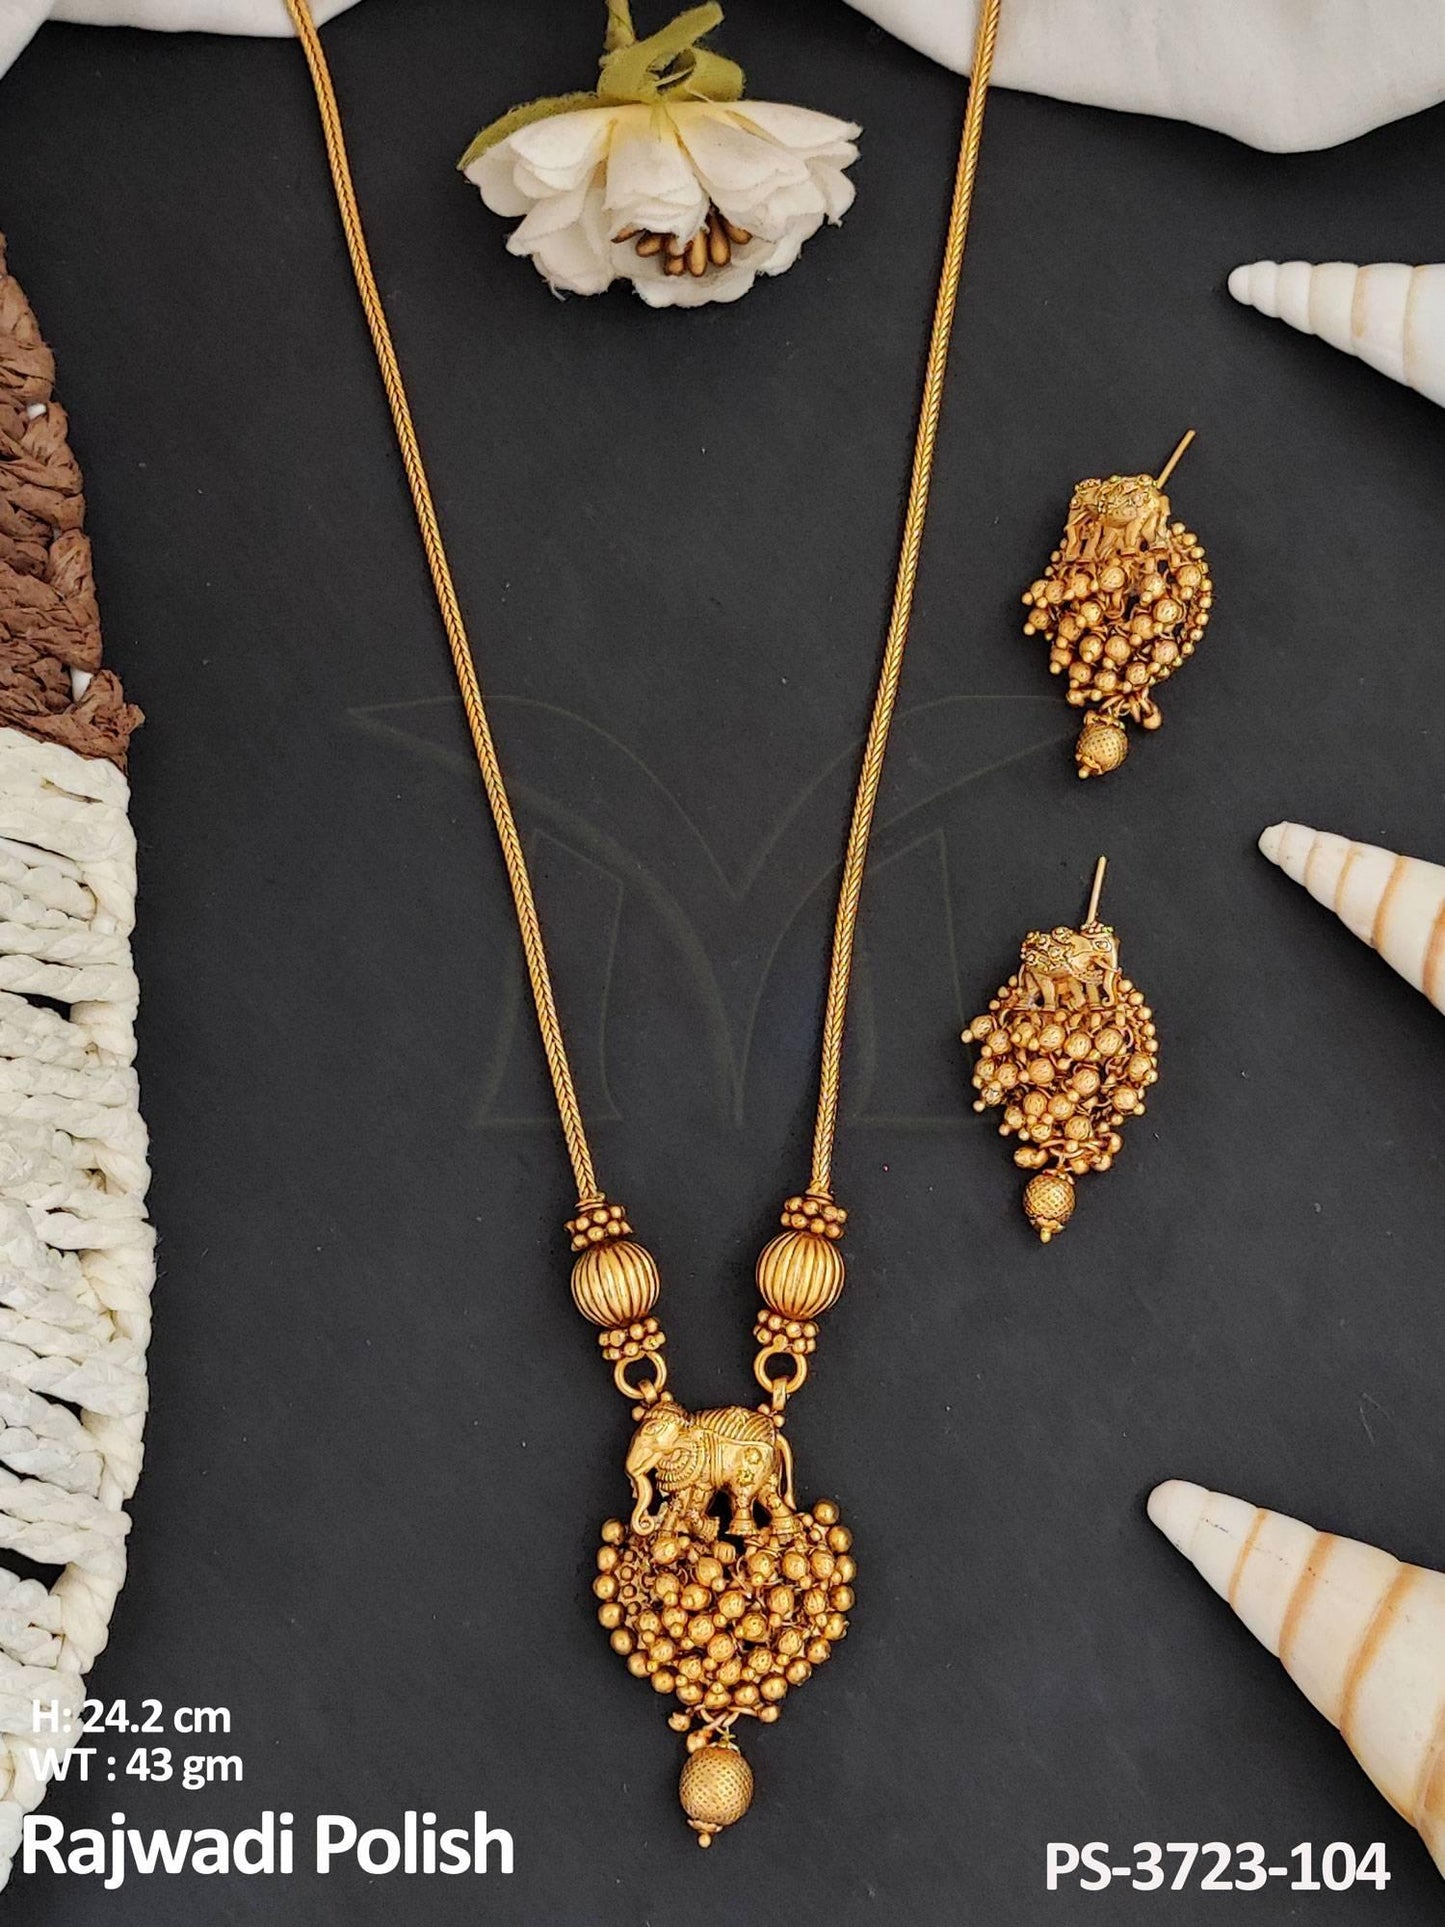 Elevate your style with this beautiful Temple Jewellery Elephant Pendant Set.